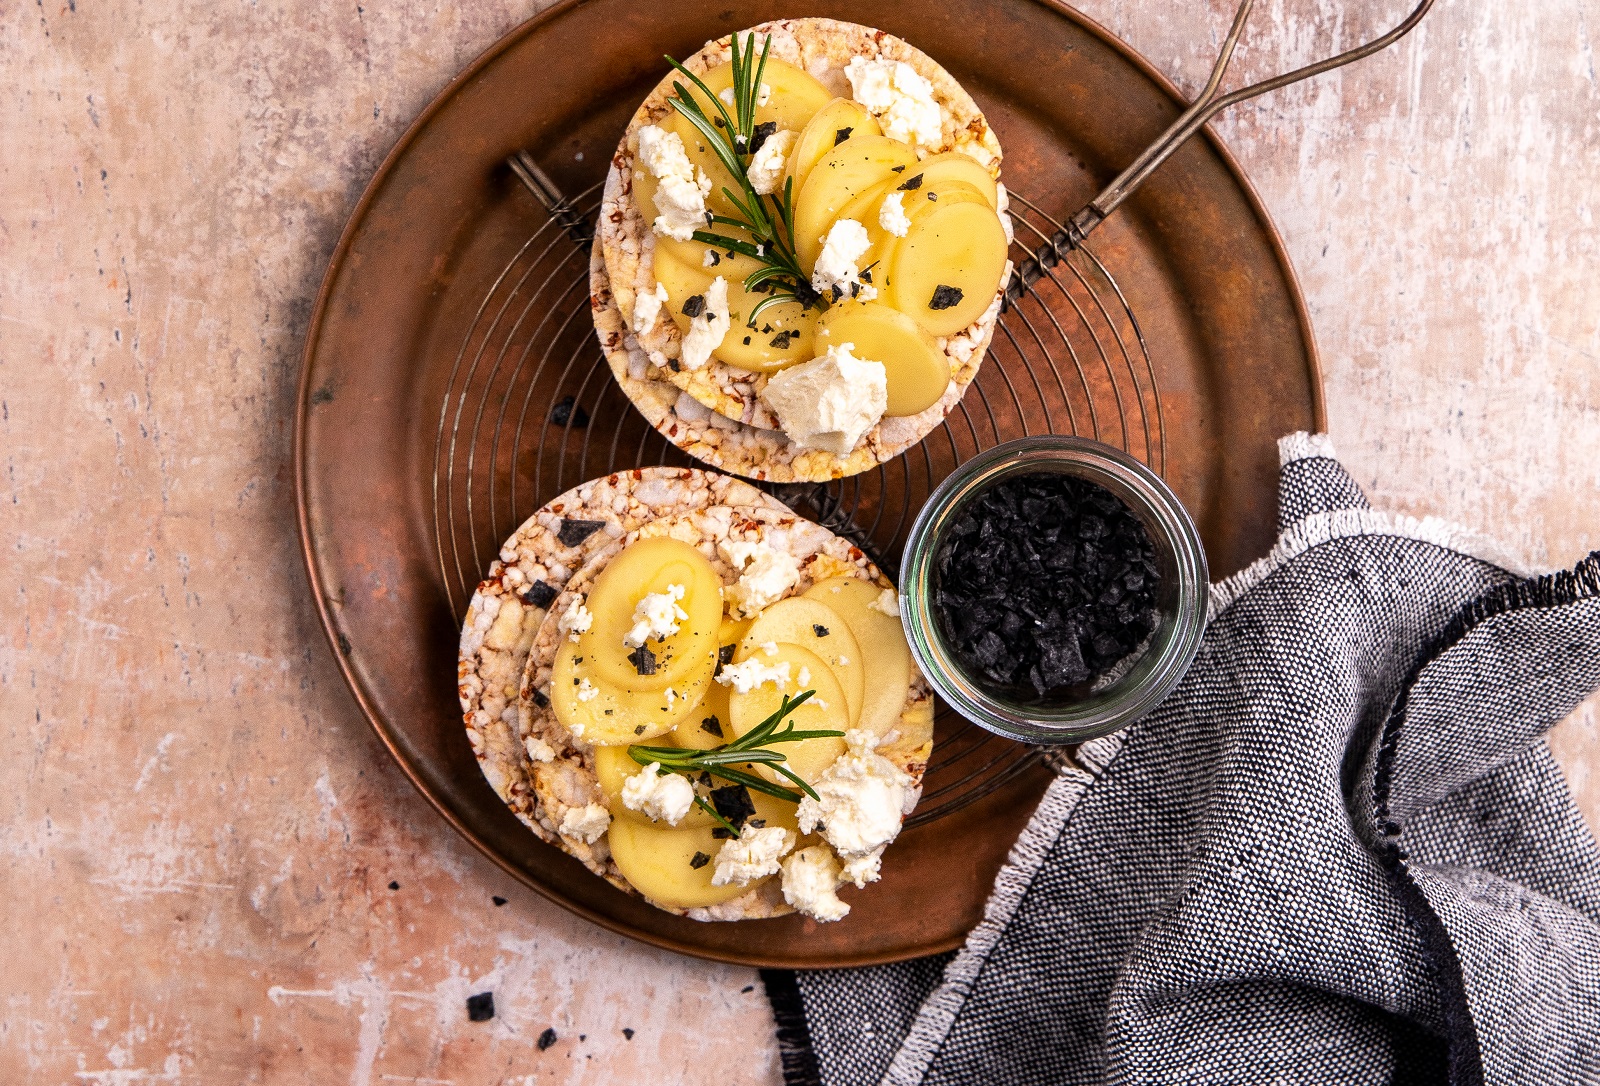 Potato, Goat's Cheese & Rosemary on CORN THINS slices for lunch or dinner